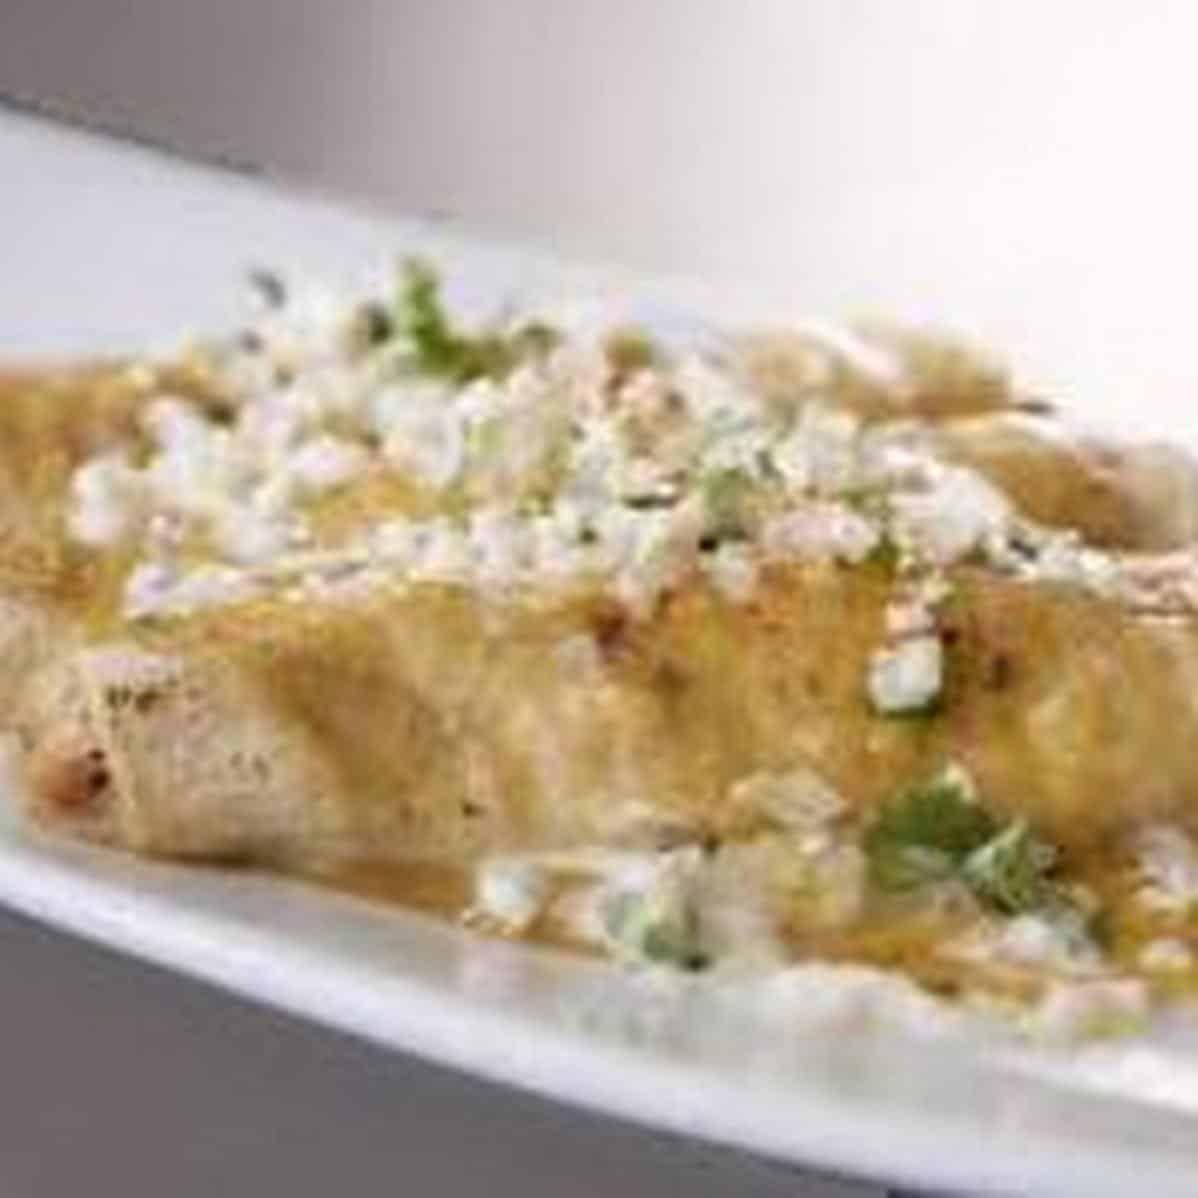  These enchiladas are so good that they might just cause a stampede to the kitchen!